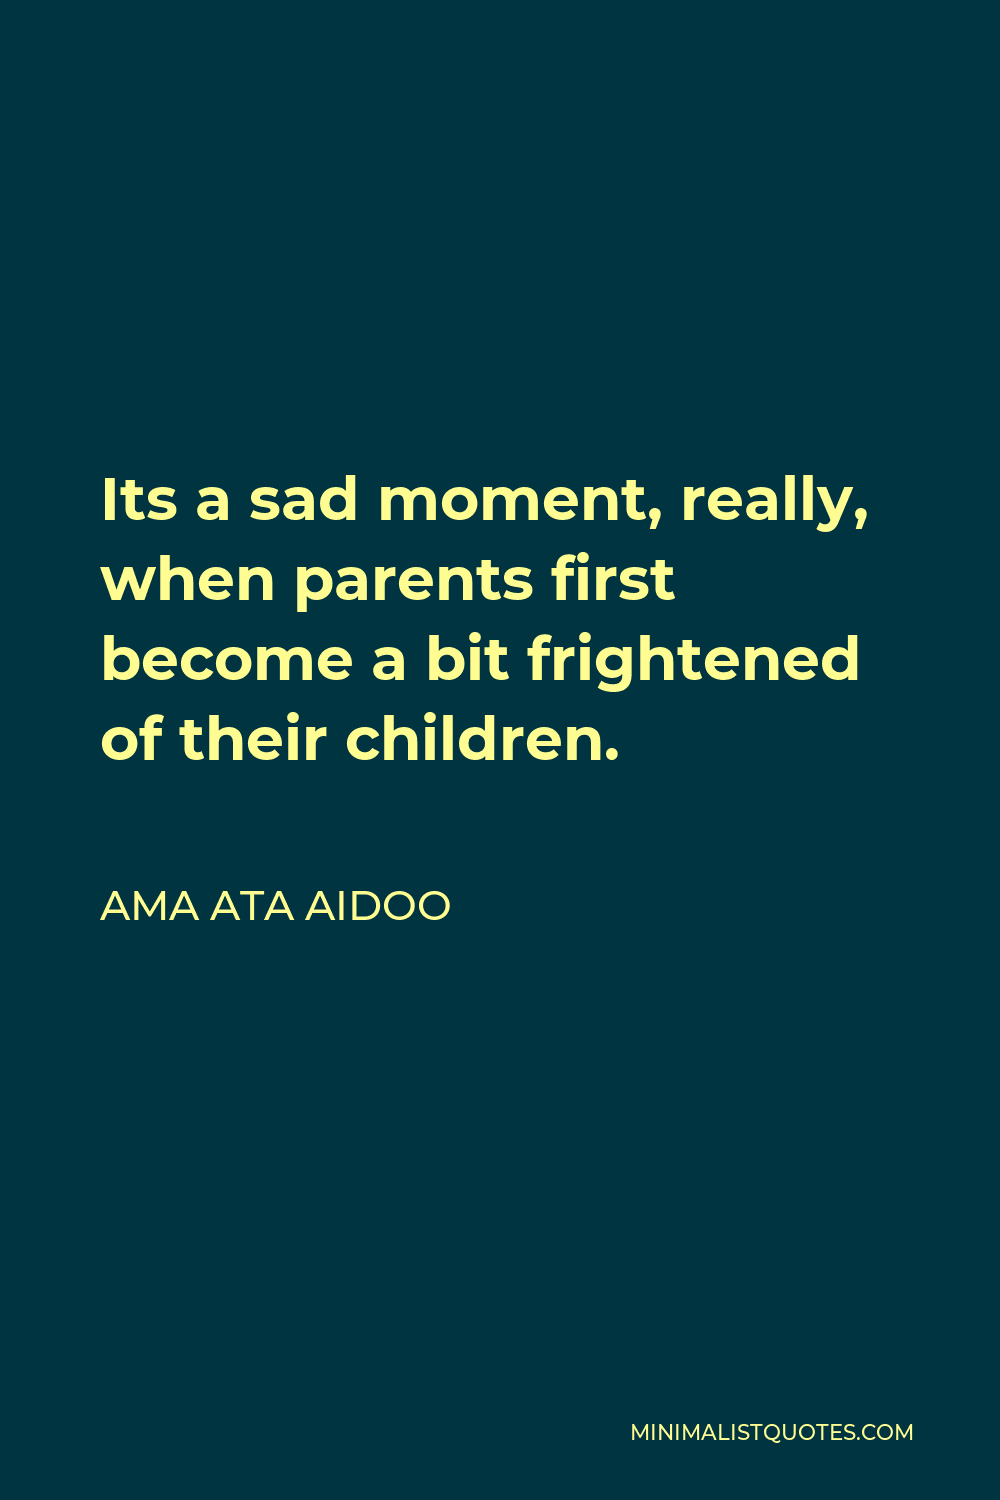 Ama Ata Aidoo Quote - Its a sad moment, really, when parents first become a bit frightened of their children.